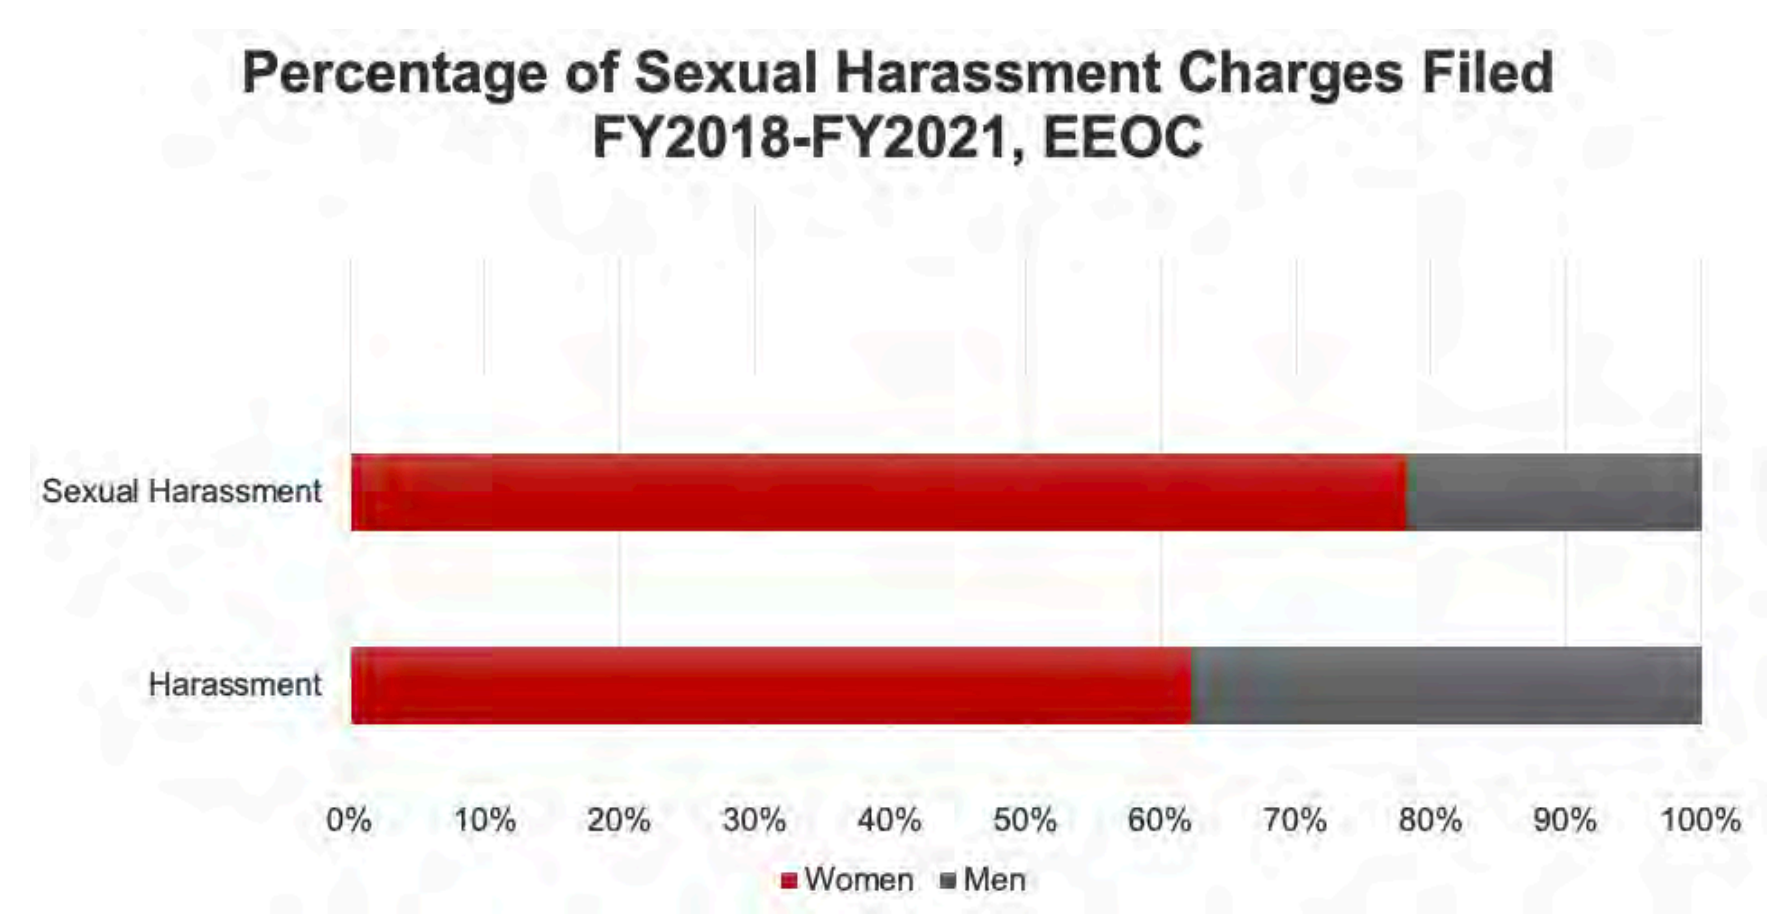 Percentage of sexual harrassment charges filed FY2018-FY2021, EEOC.